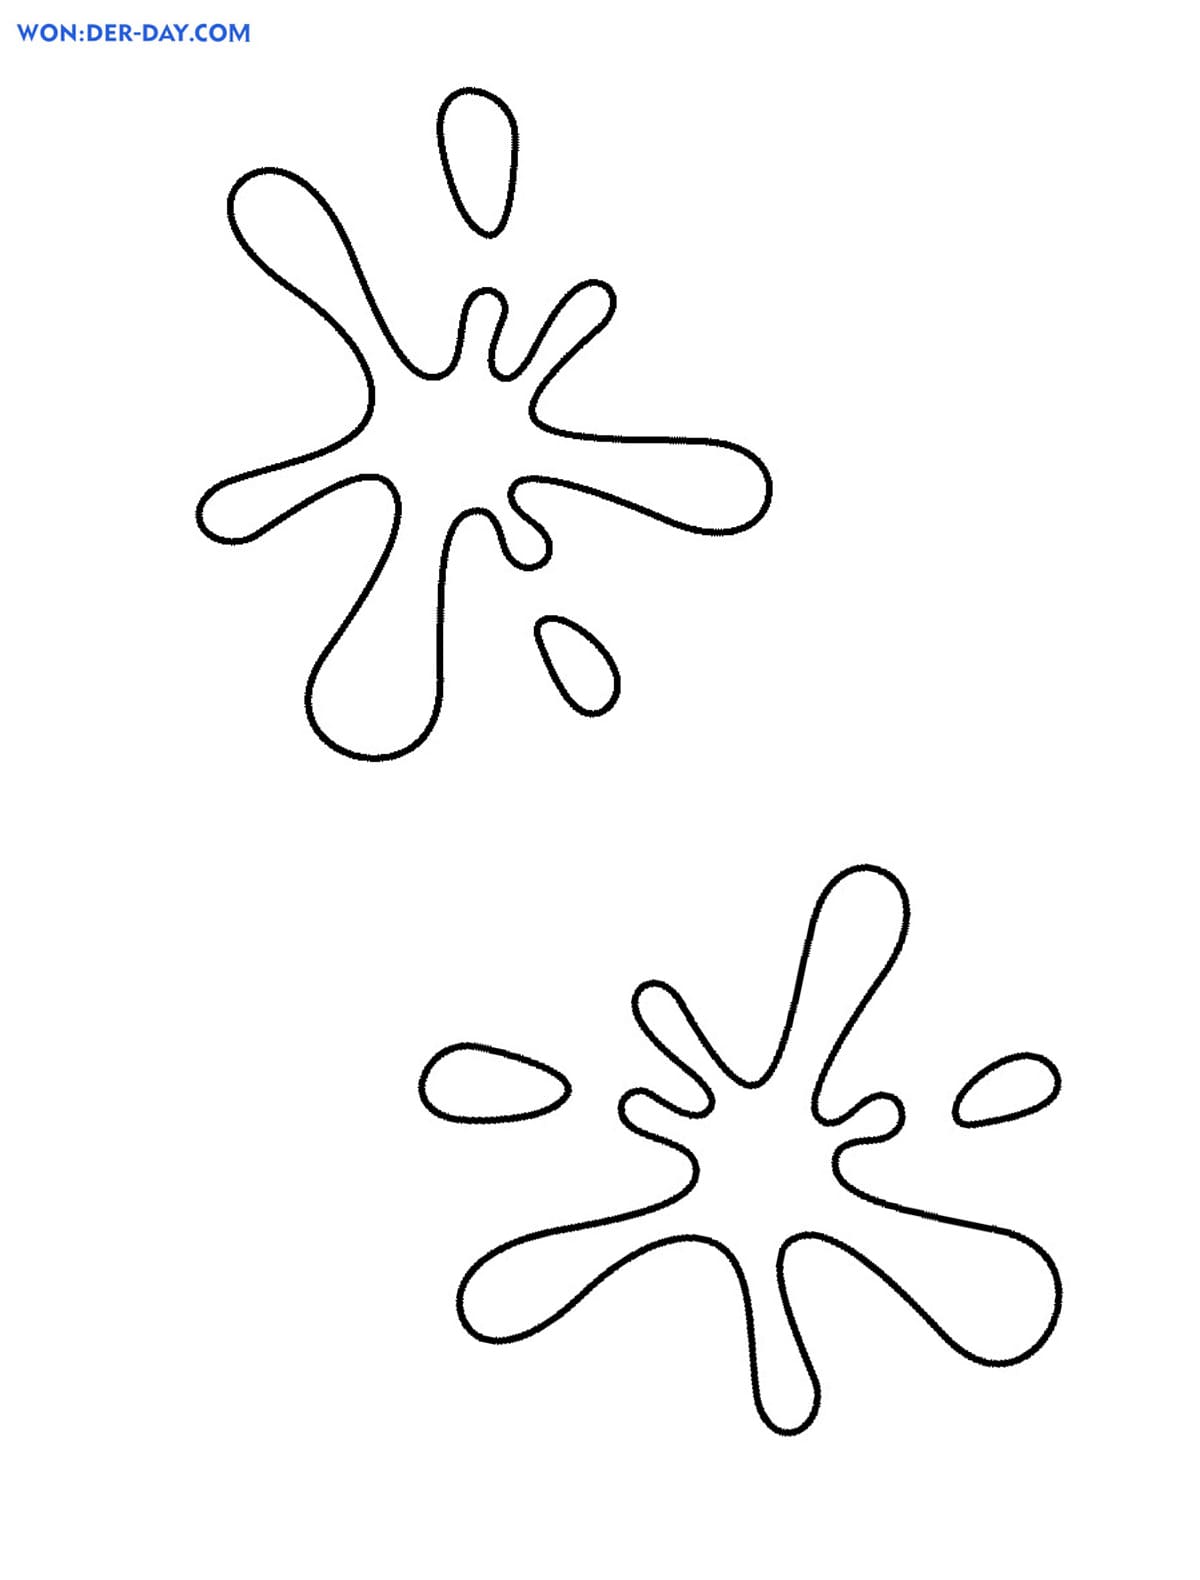 Slime Coloring Pages Activity SEL Resource No Prep by IncredibleDesigns